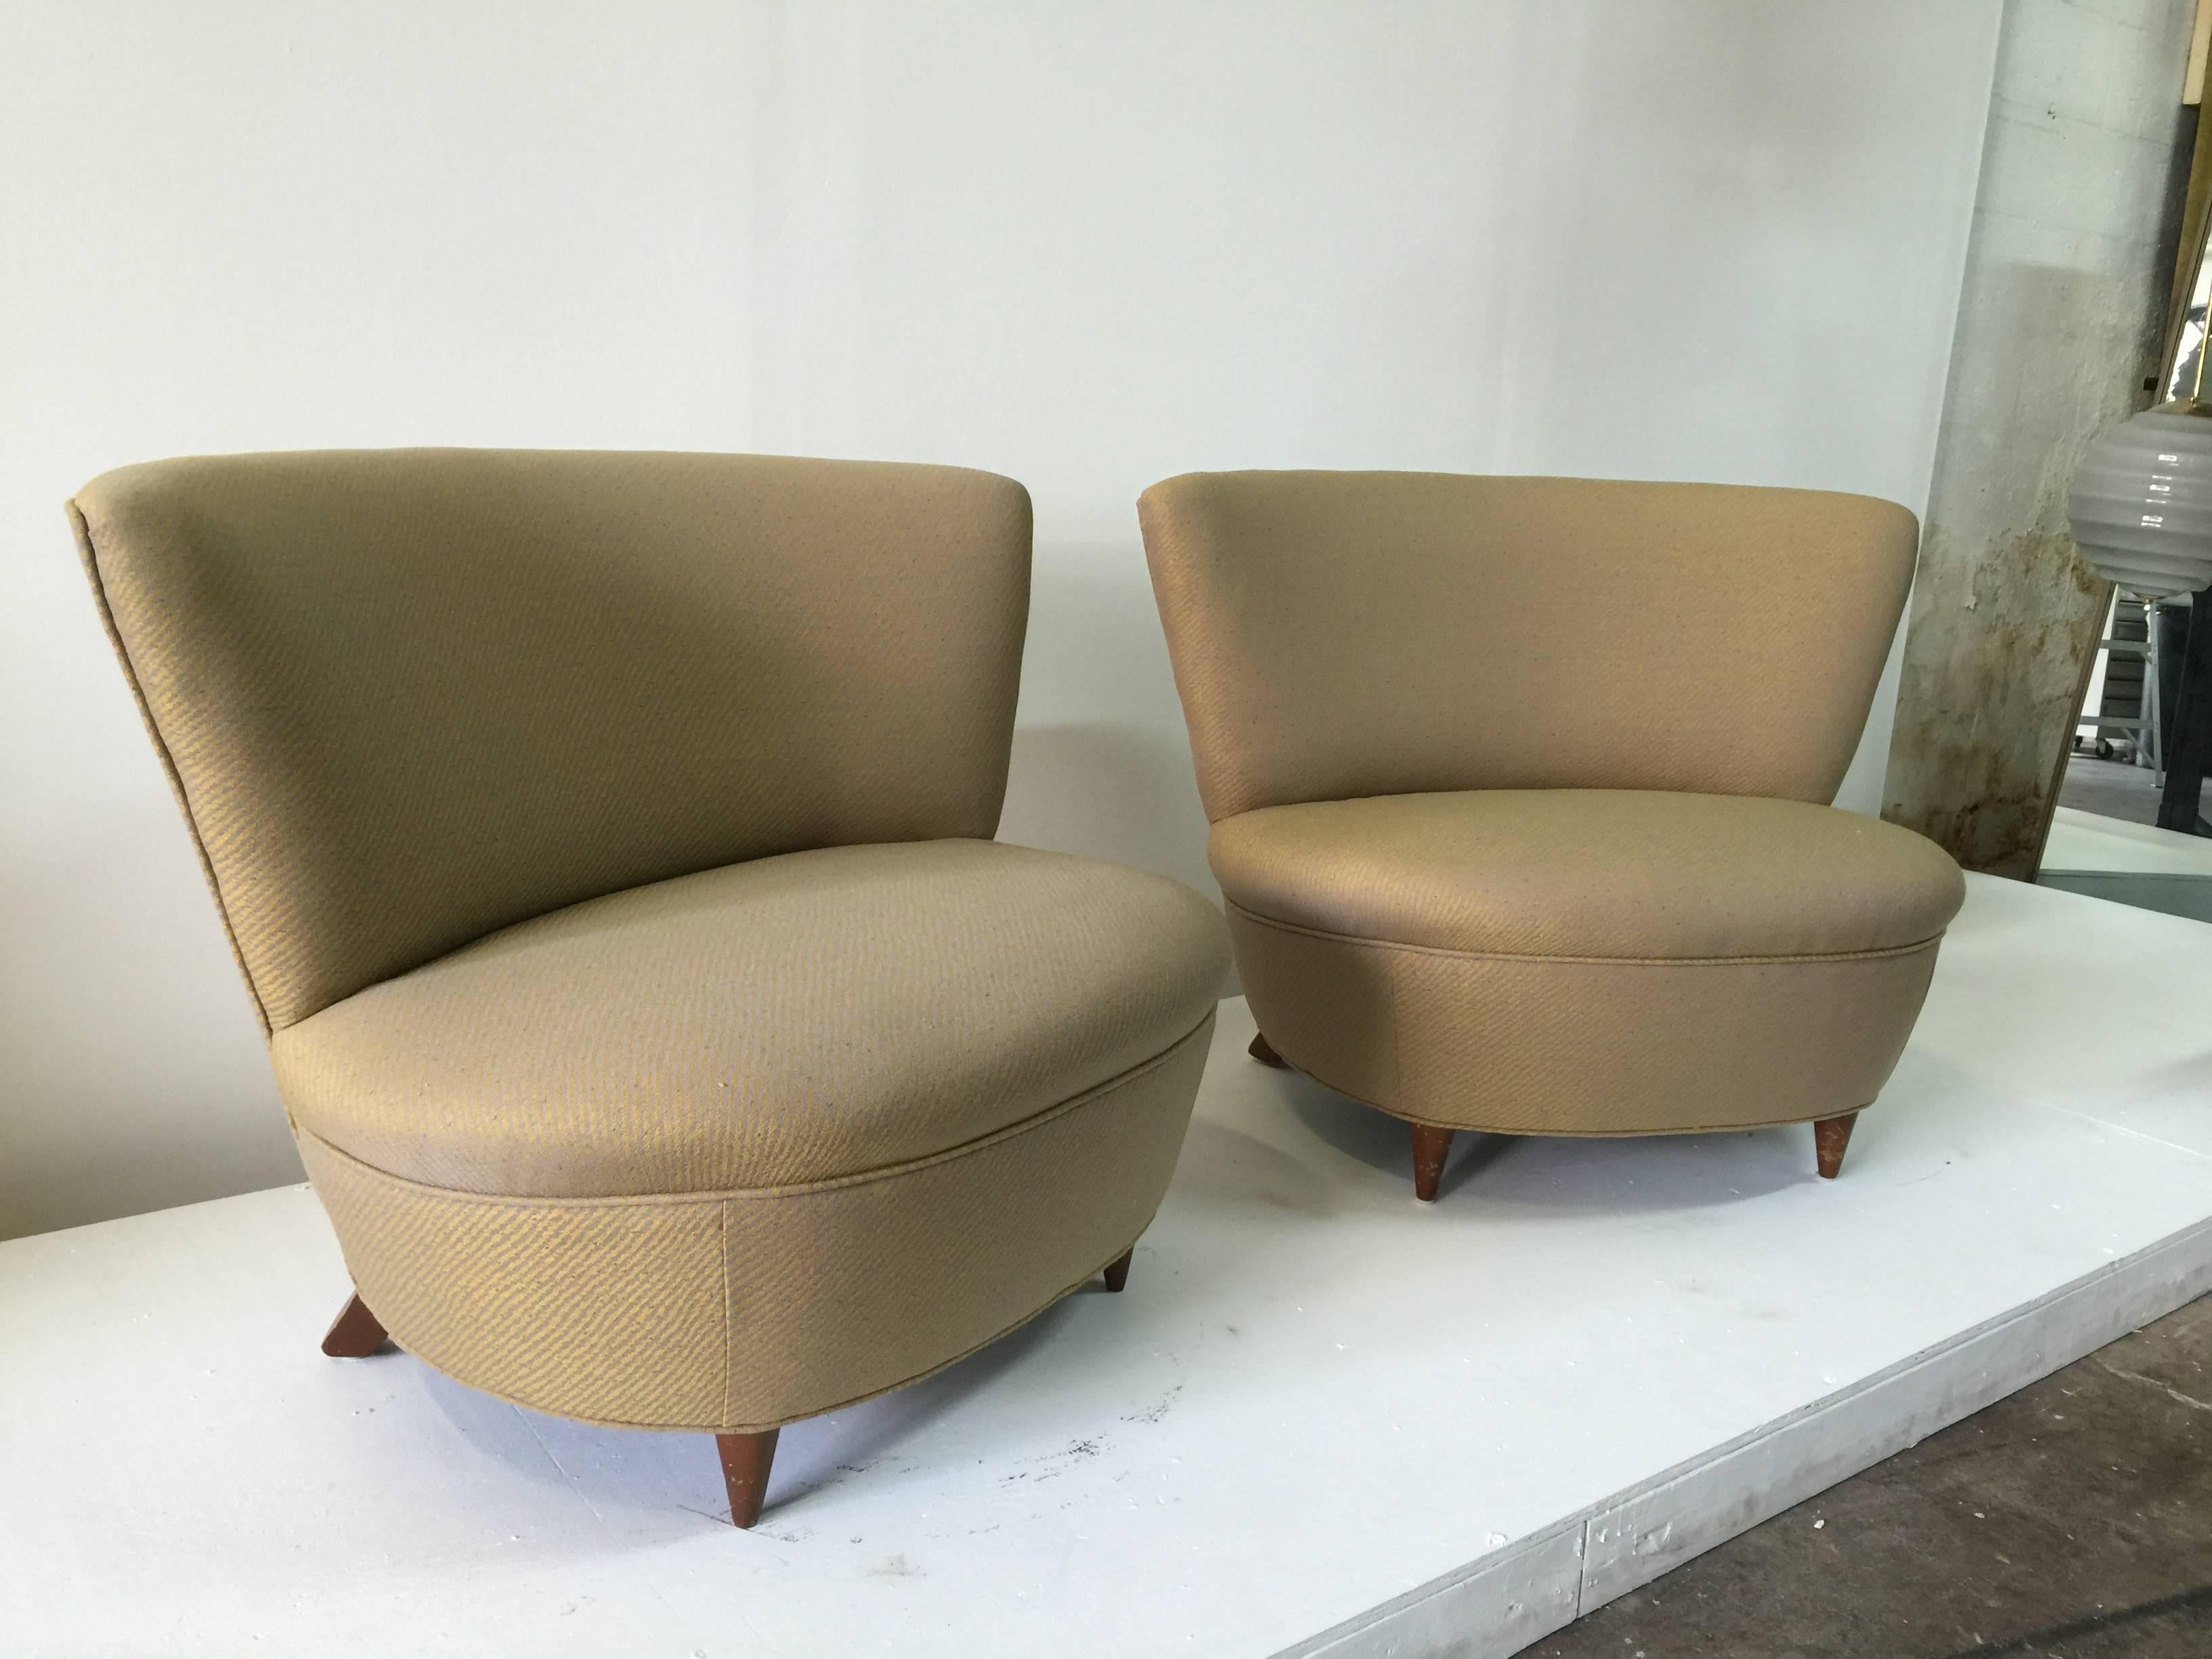 Sleek and iconic, these documented Rohde slipper chairs with wood legs.